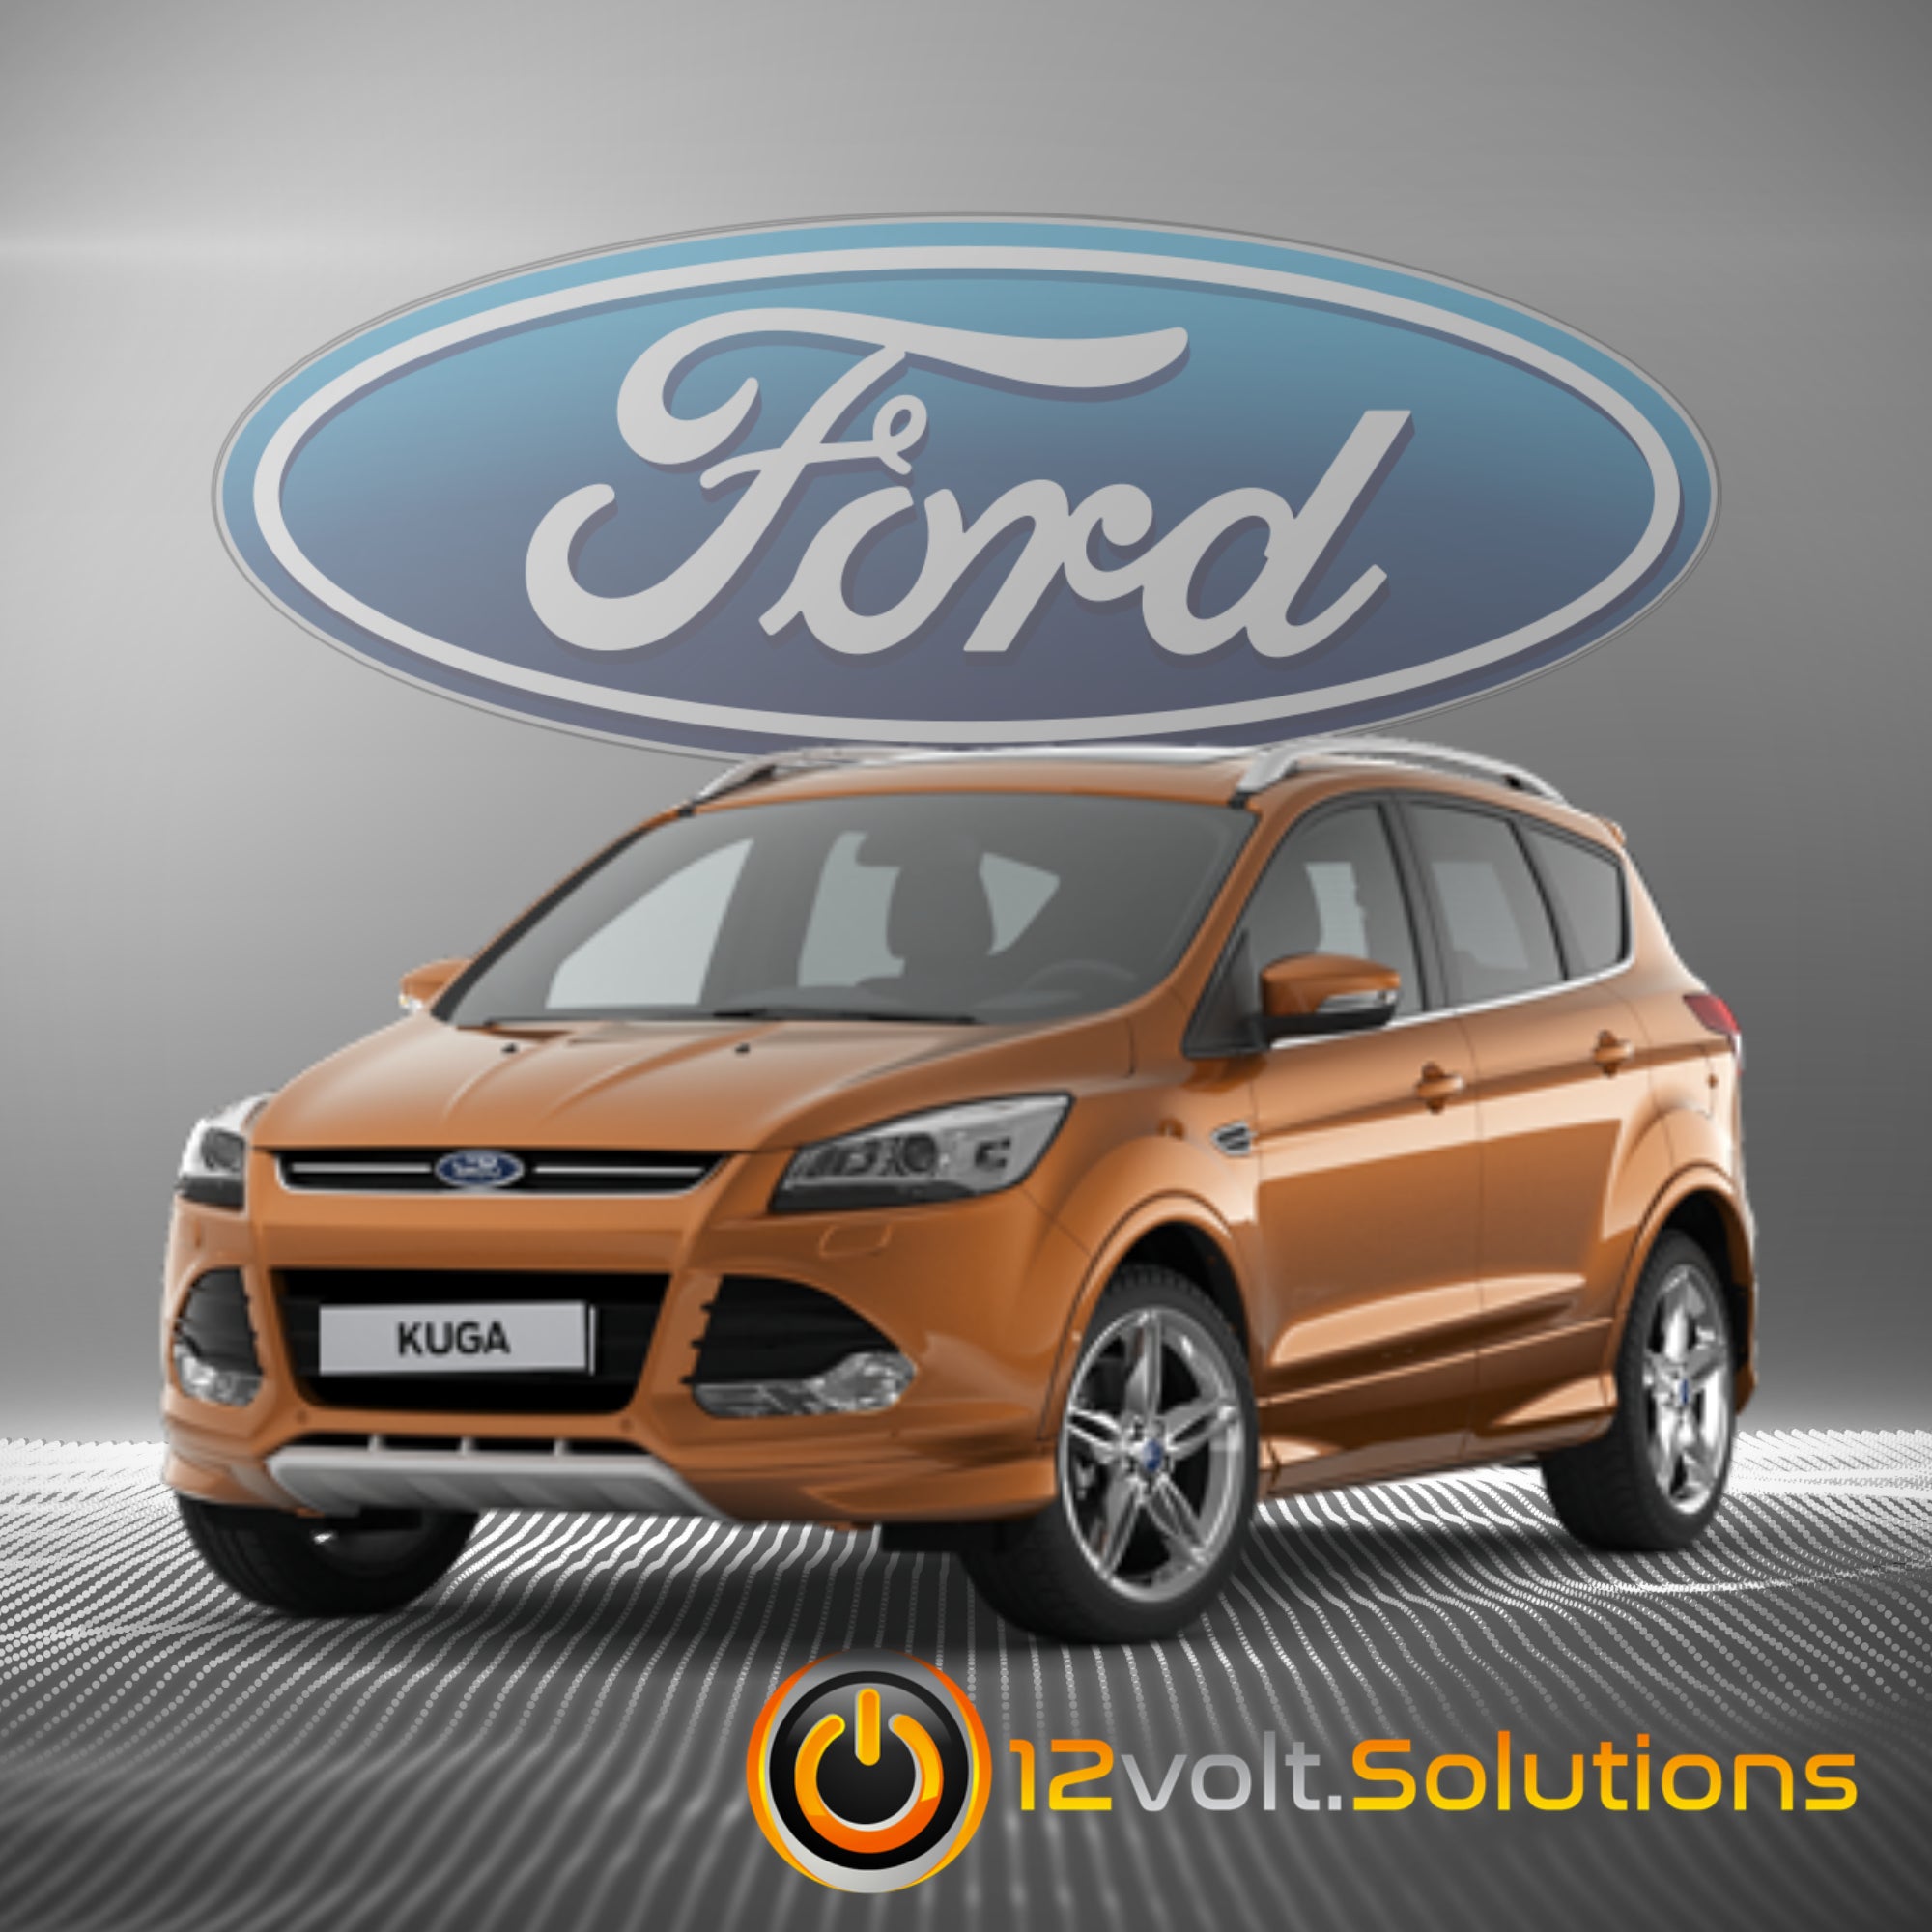 2013-2015 Ford Kuga Remote Start Plug and Play Kit-12Volt.Solutions